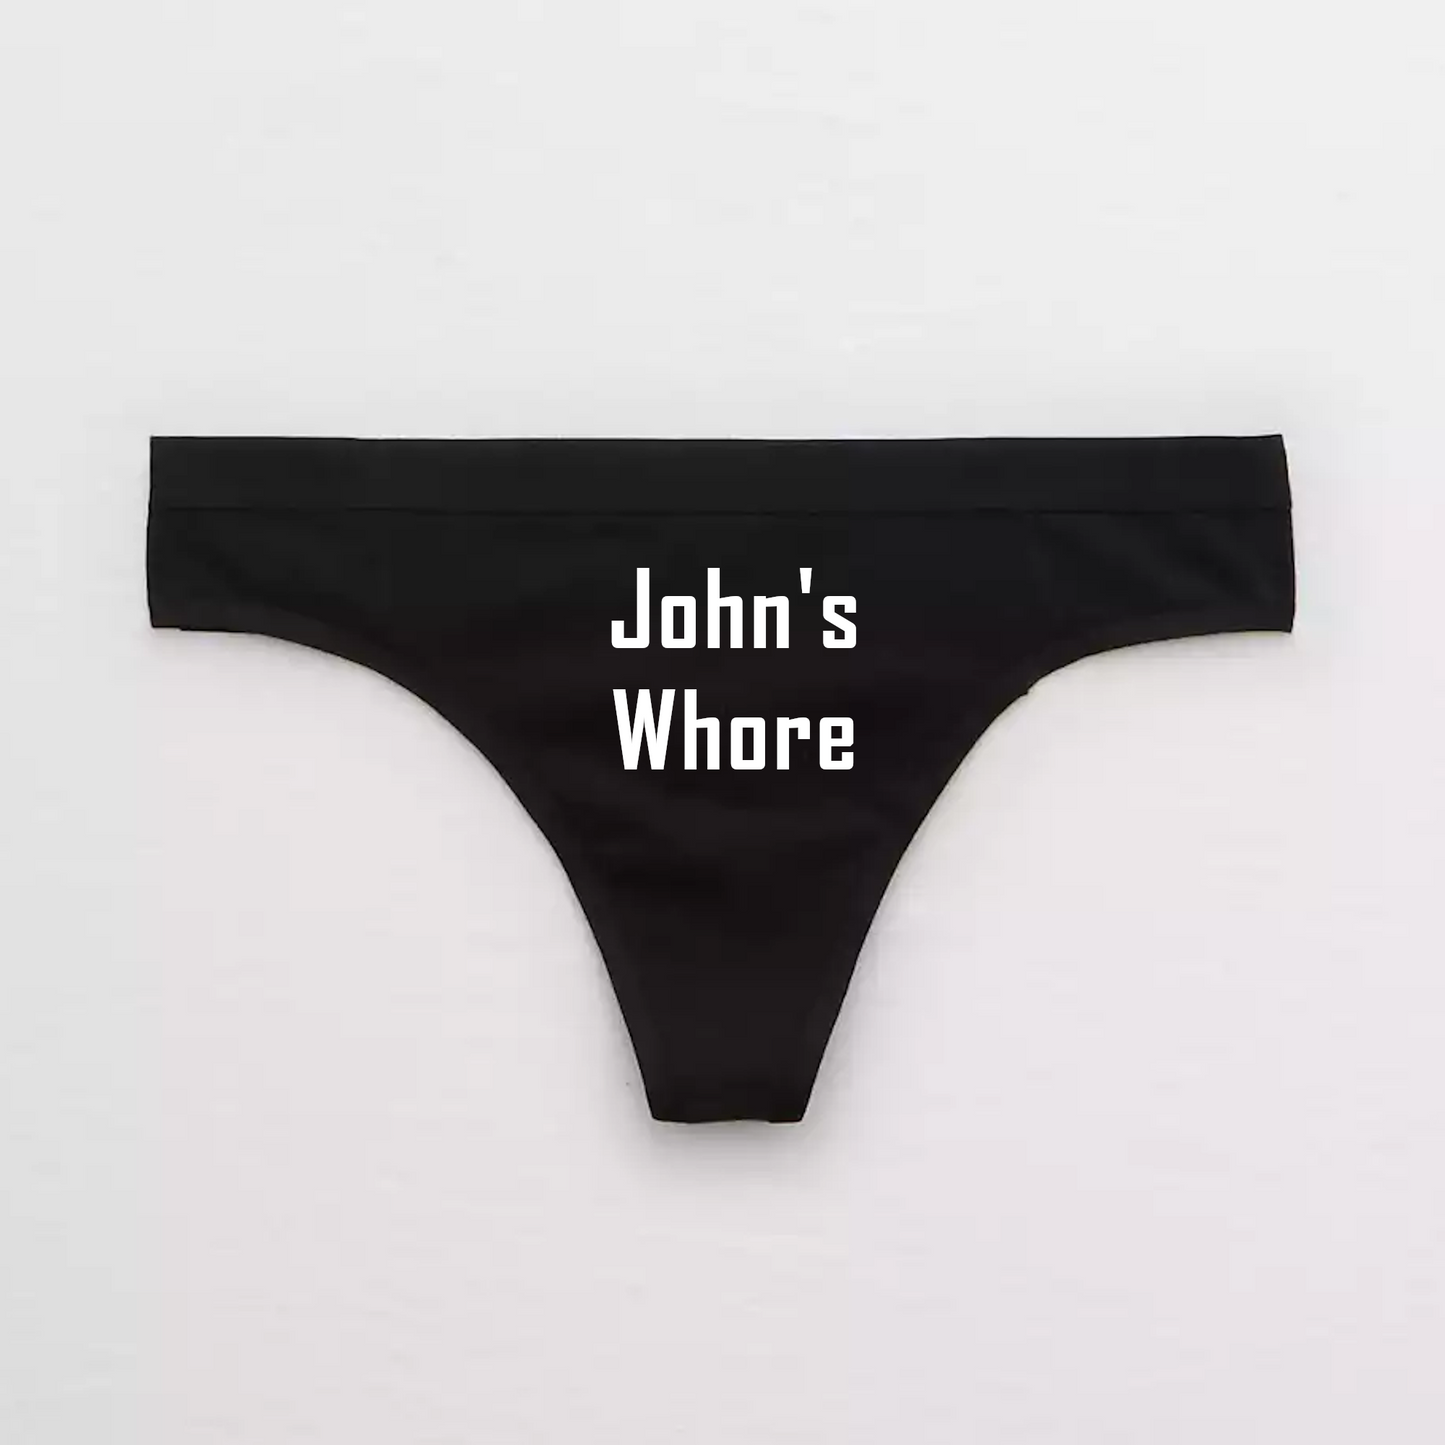 Names Whore Slutty Personalized Panties